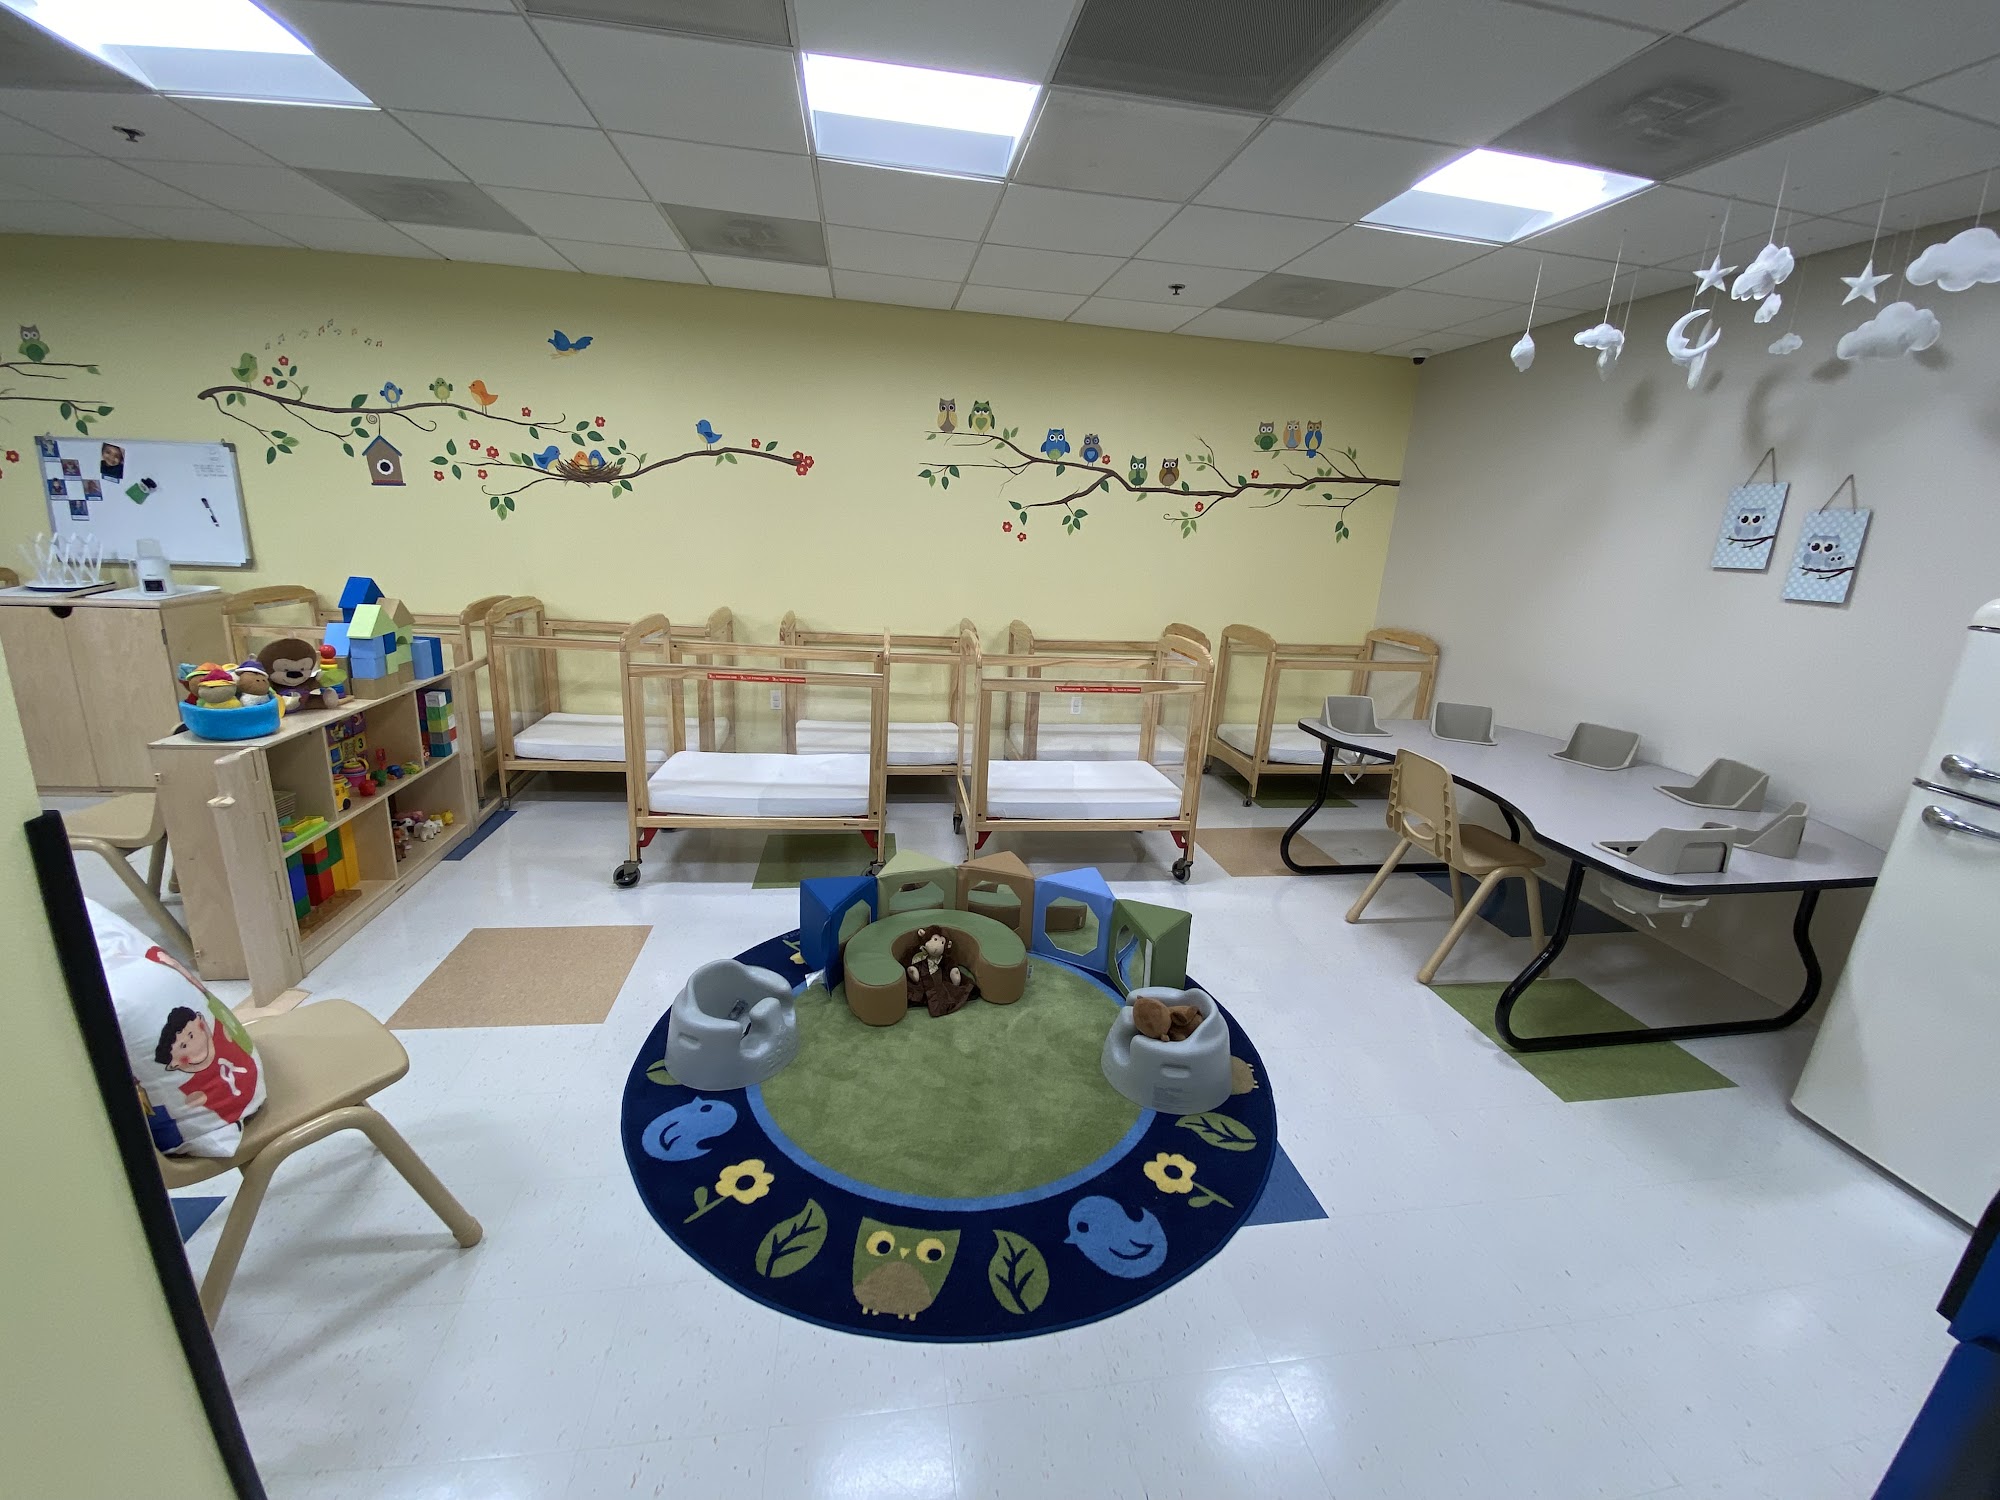 A to Z fun care Early Learning Childcare Center